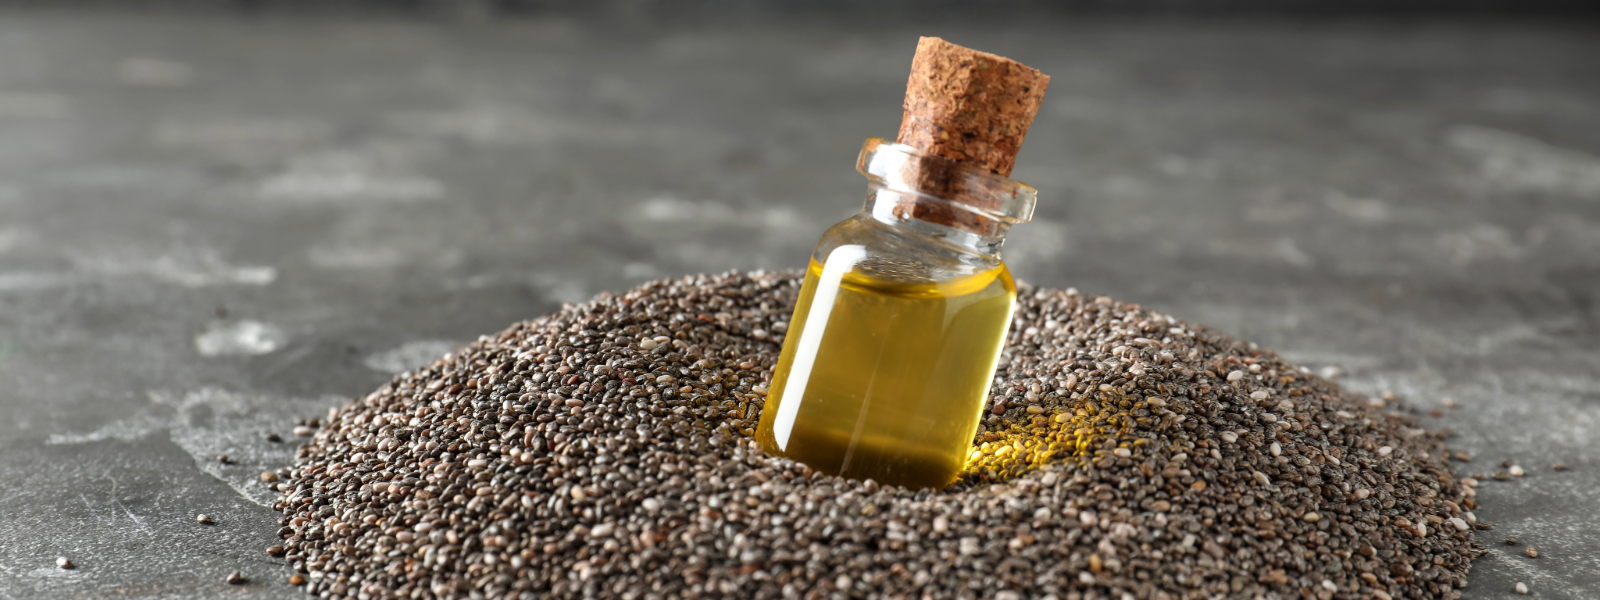 Ingredient Highlight: Chia Seed Oil